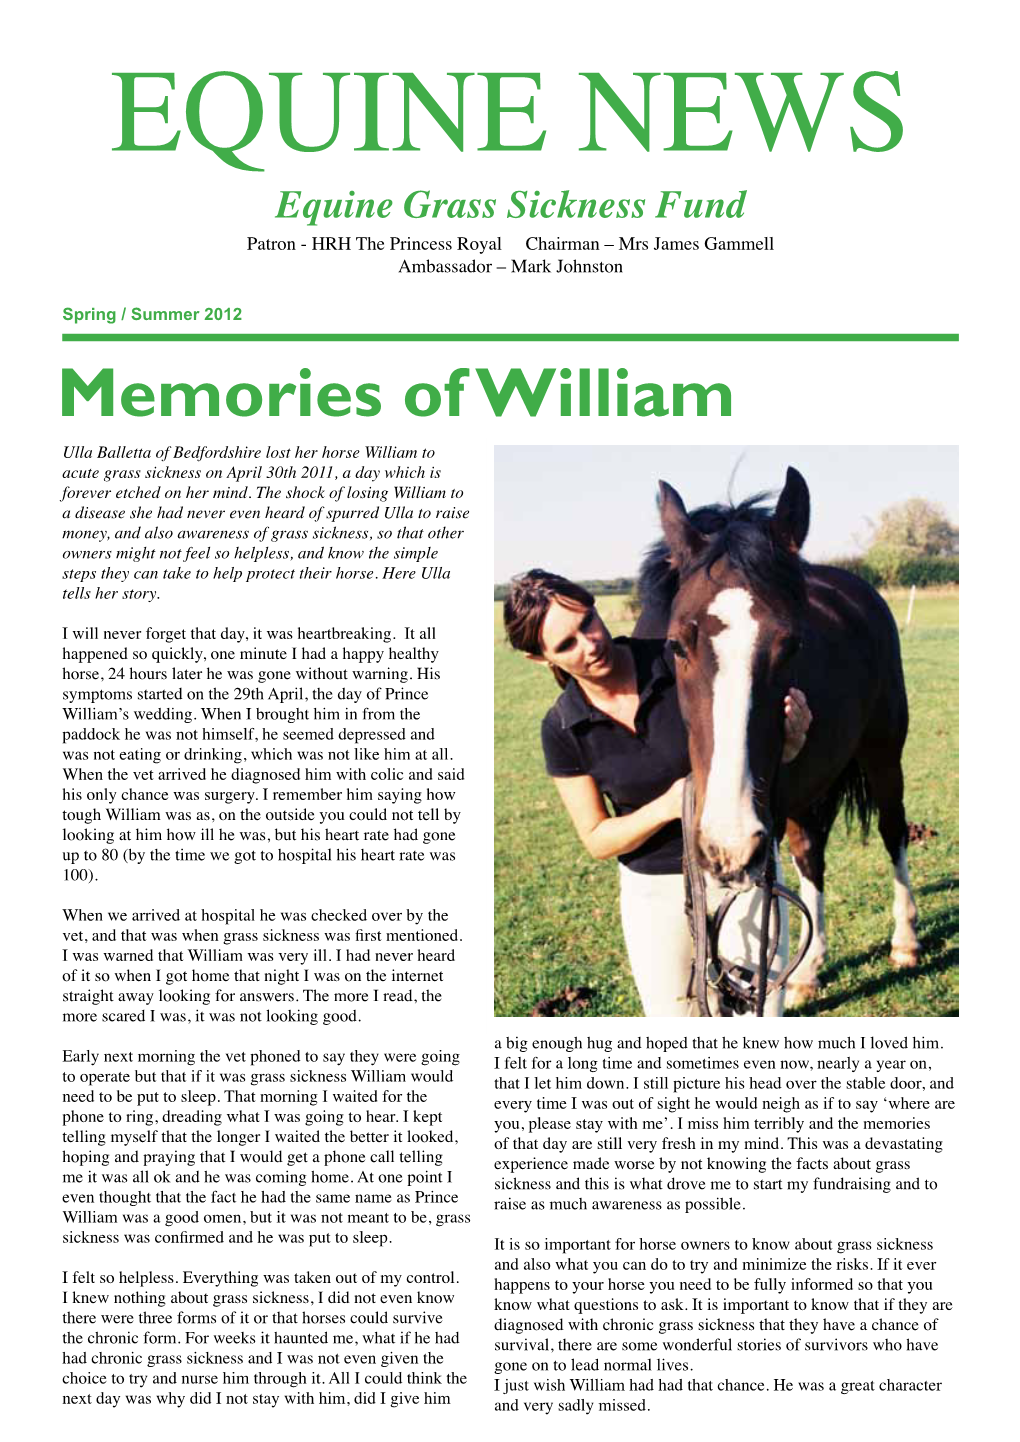 Memories of William Ulla Balletta of Bedfordshire Lost Her Horse William to Acute Grass Sickness on April 30Th 2011, a Day Which Is Forever Etched on Her Mind